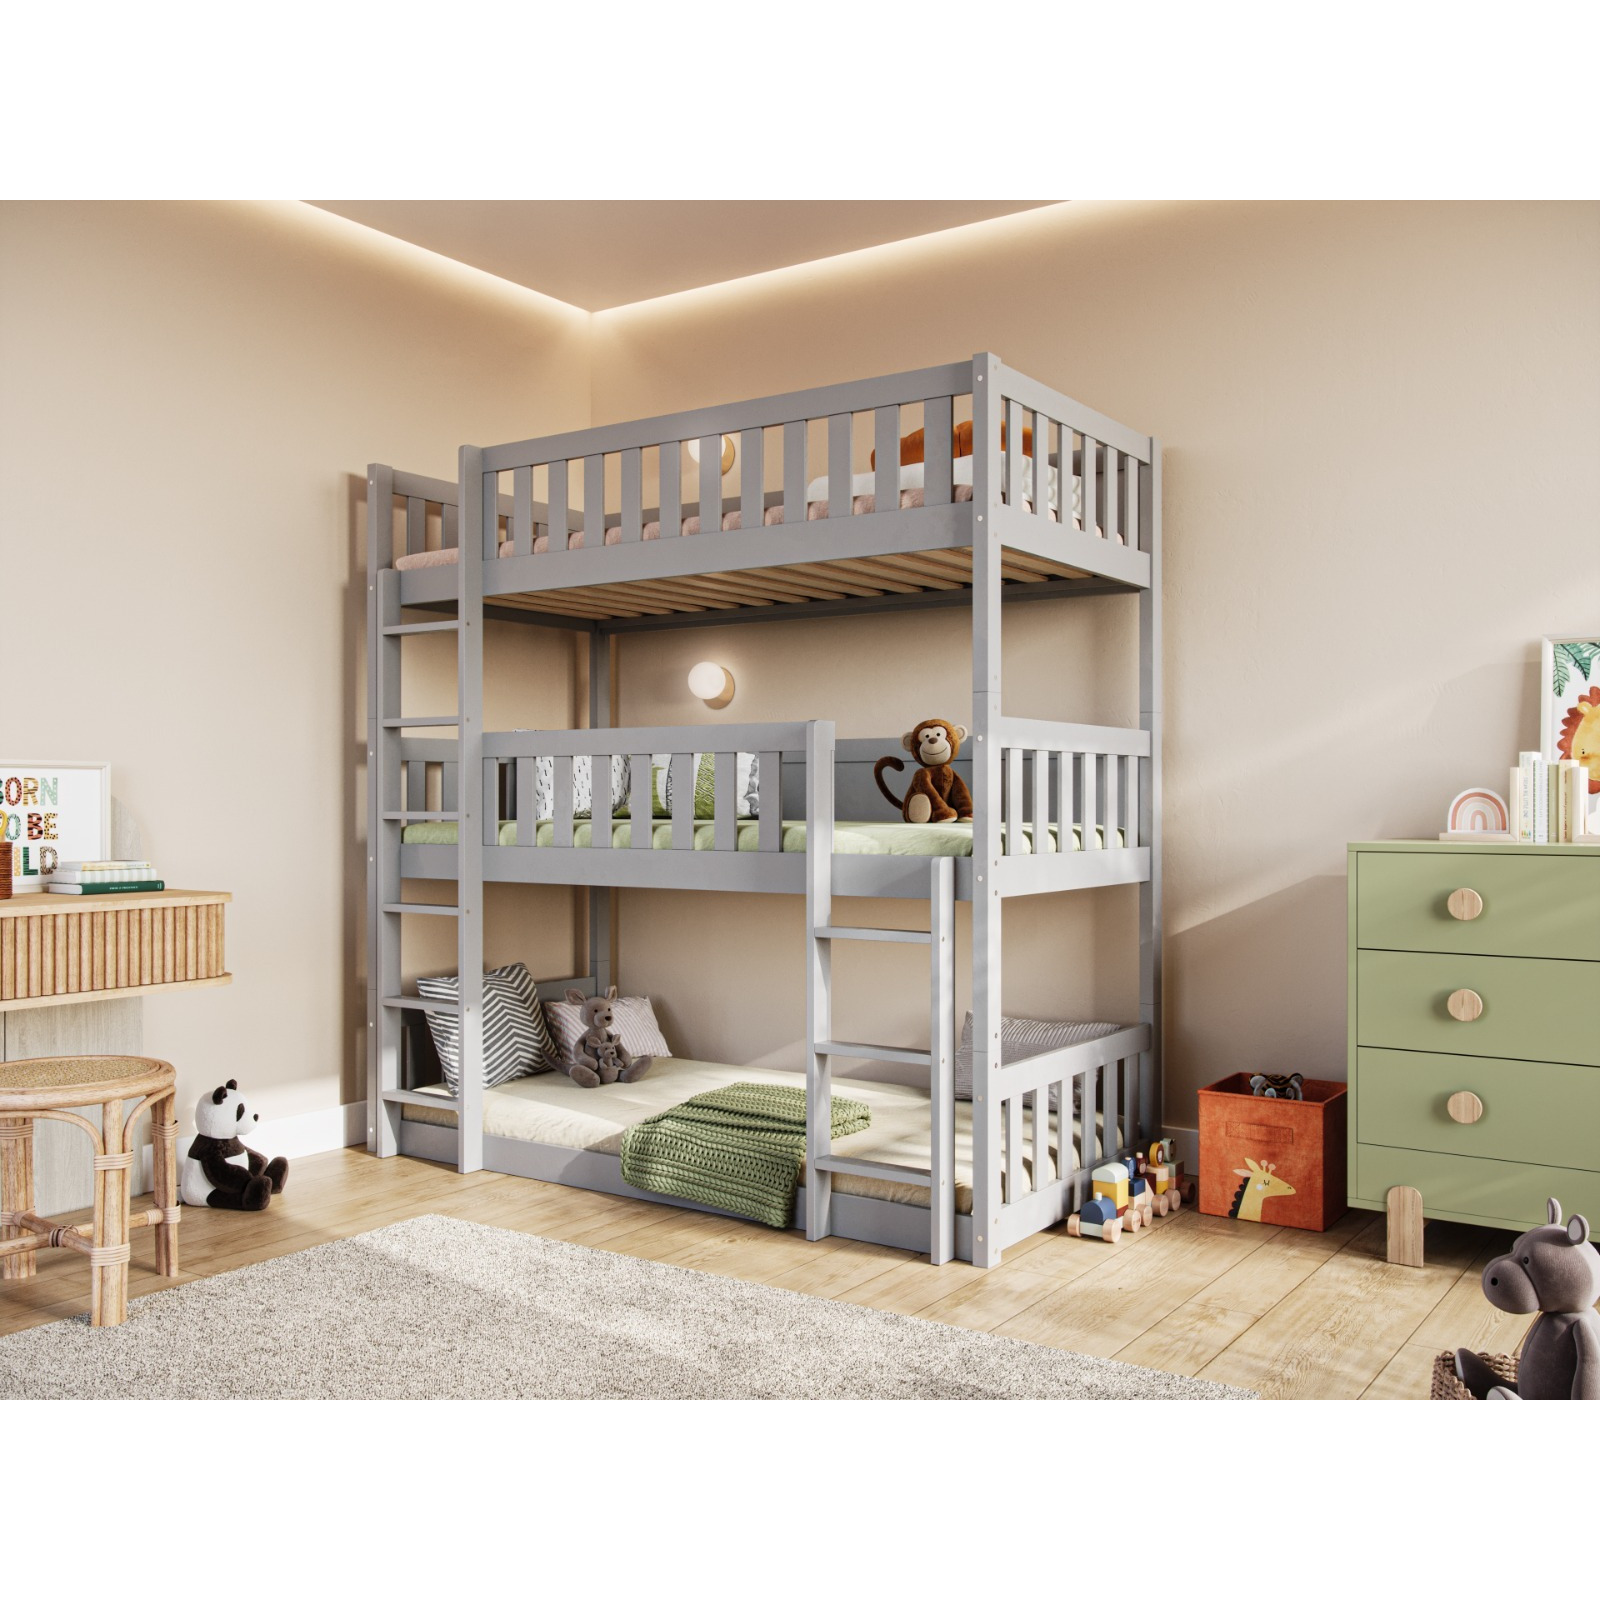 Flair Bea Triple High Wooden Bunk Bed Grey - image 1